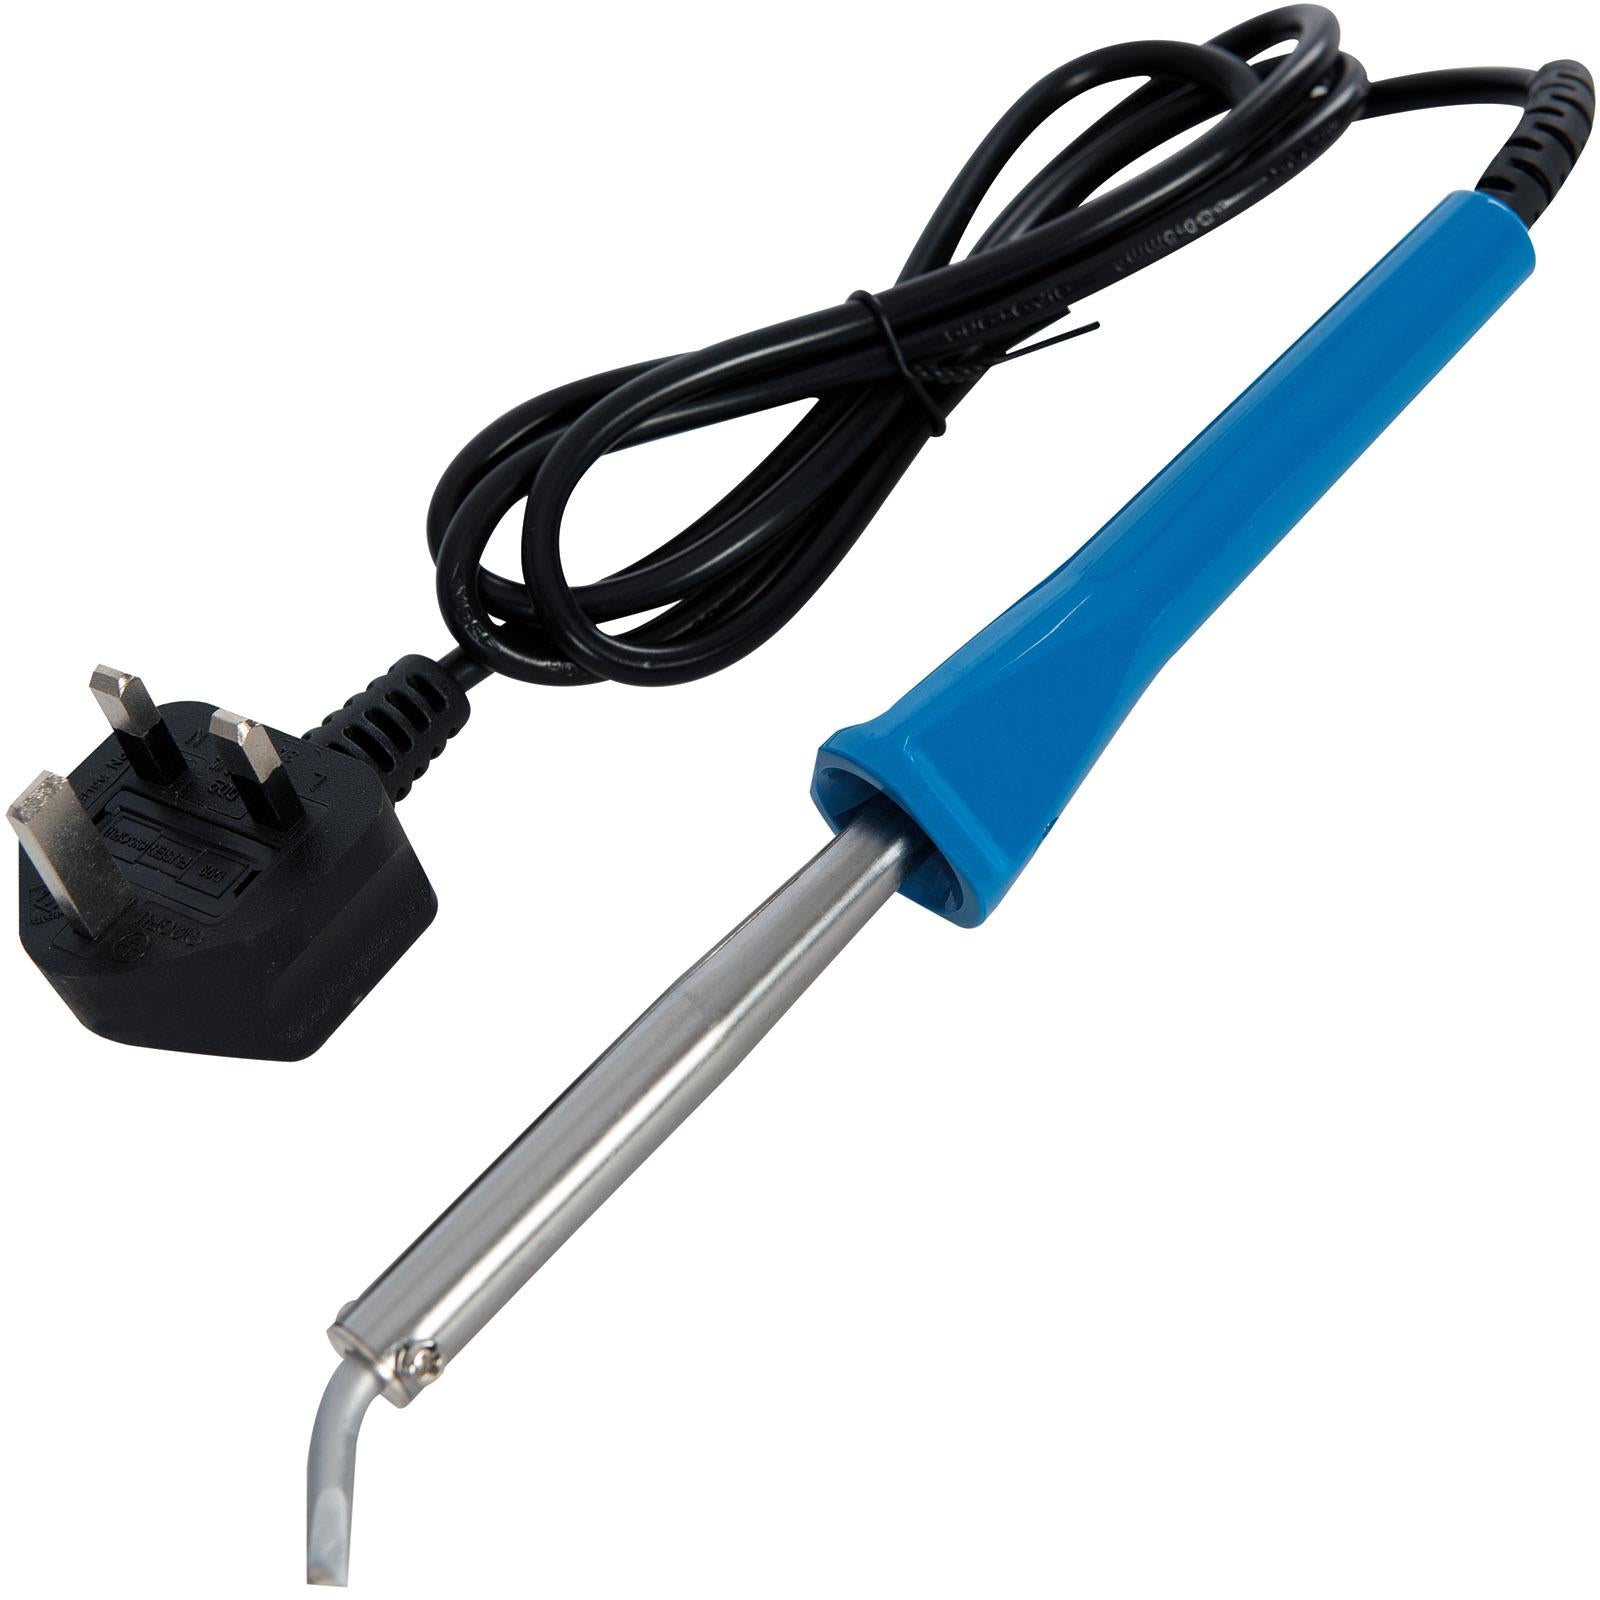 Silverline 60w Soldering Iron Angled Tip 230v Insulated Handle Solder